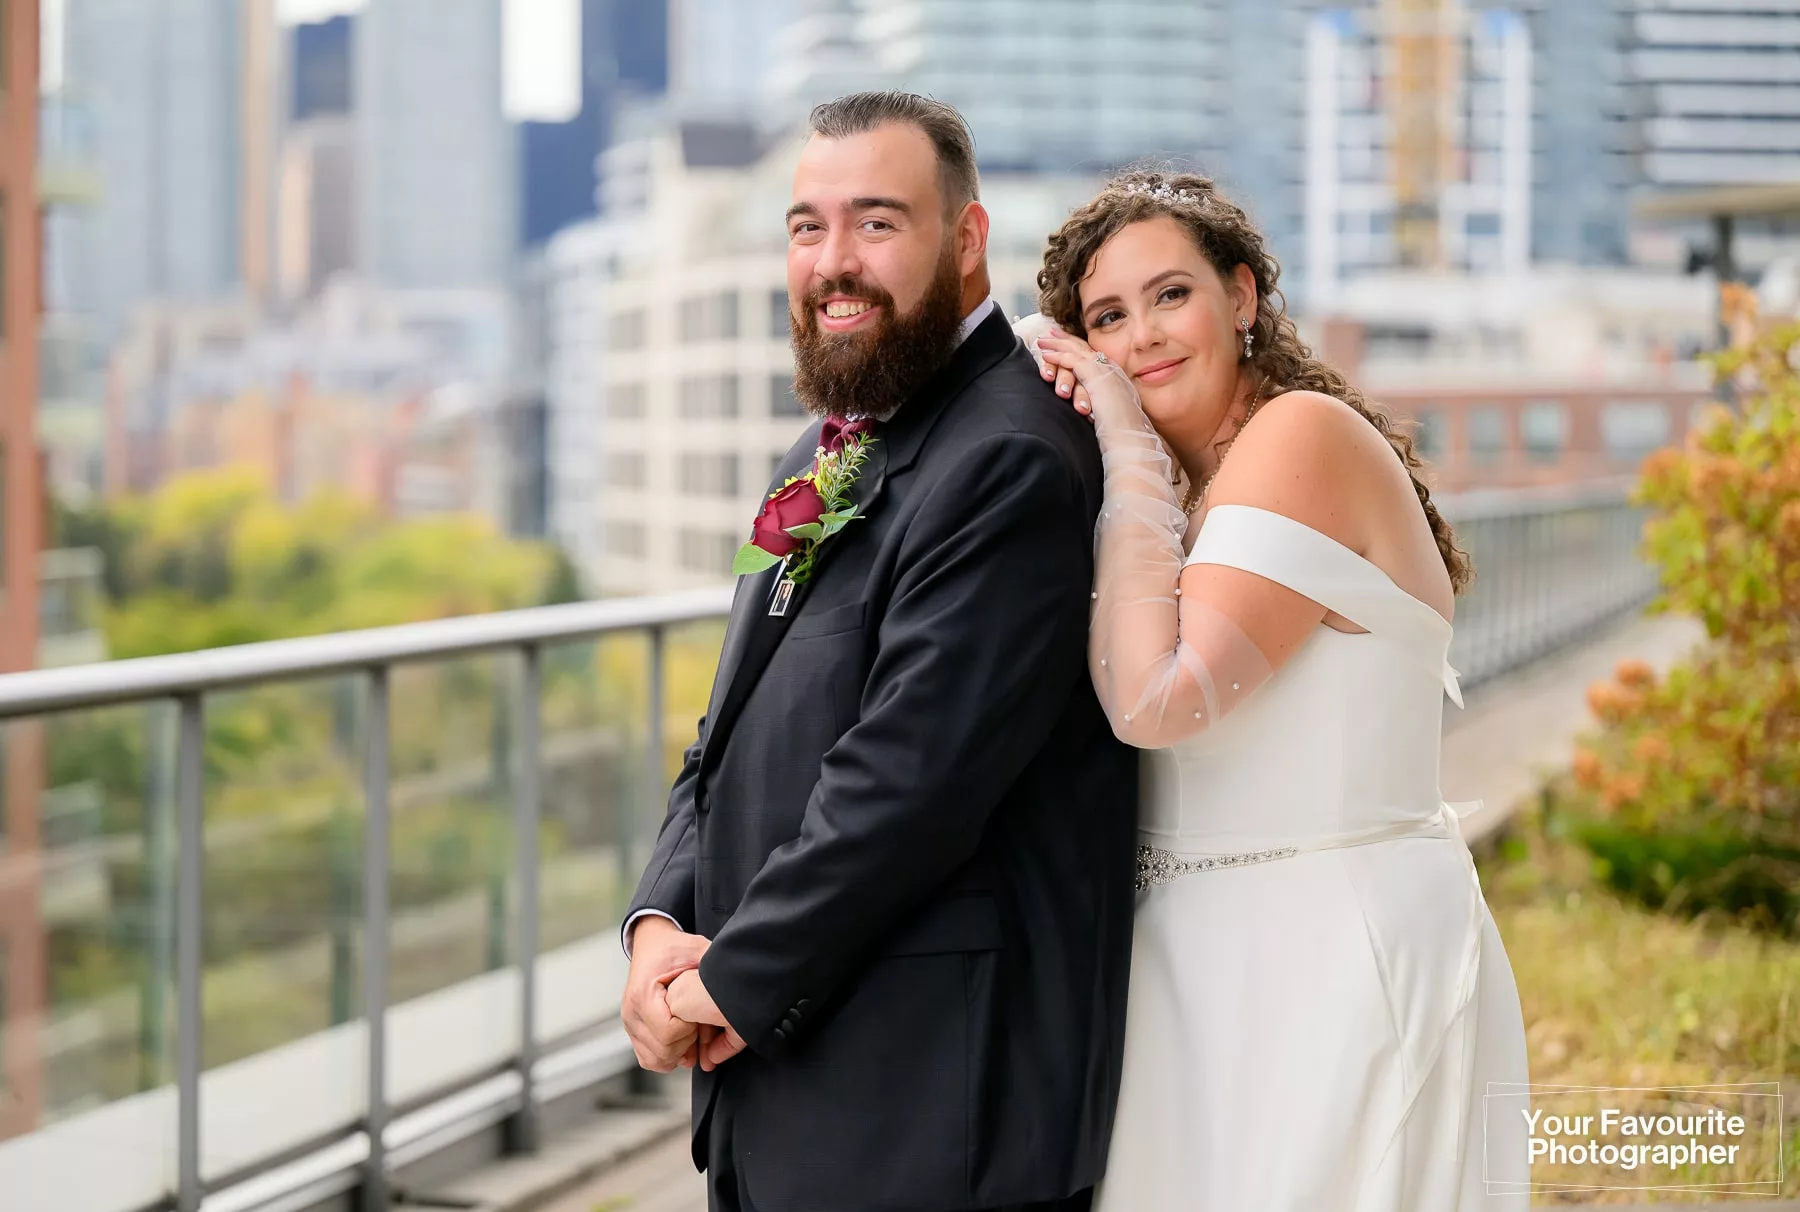 Bride leans against a groom as they pose on a rooftop patio with a garden and city in the background